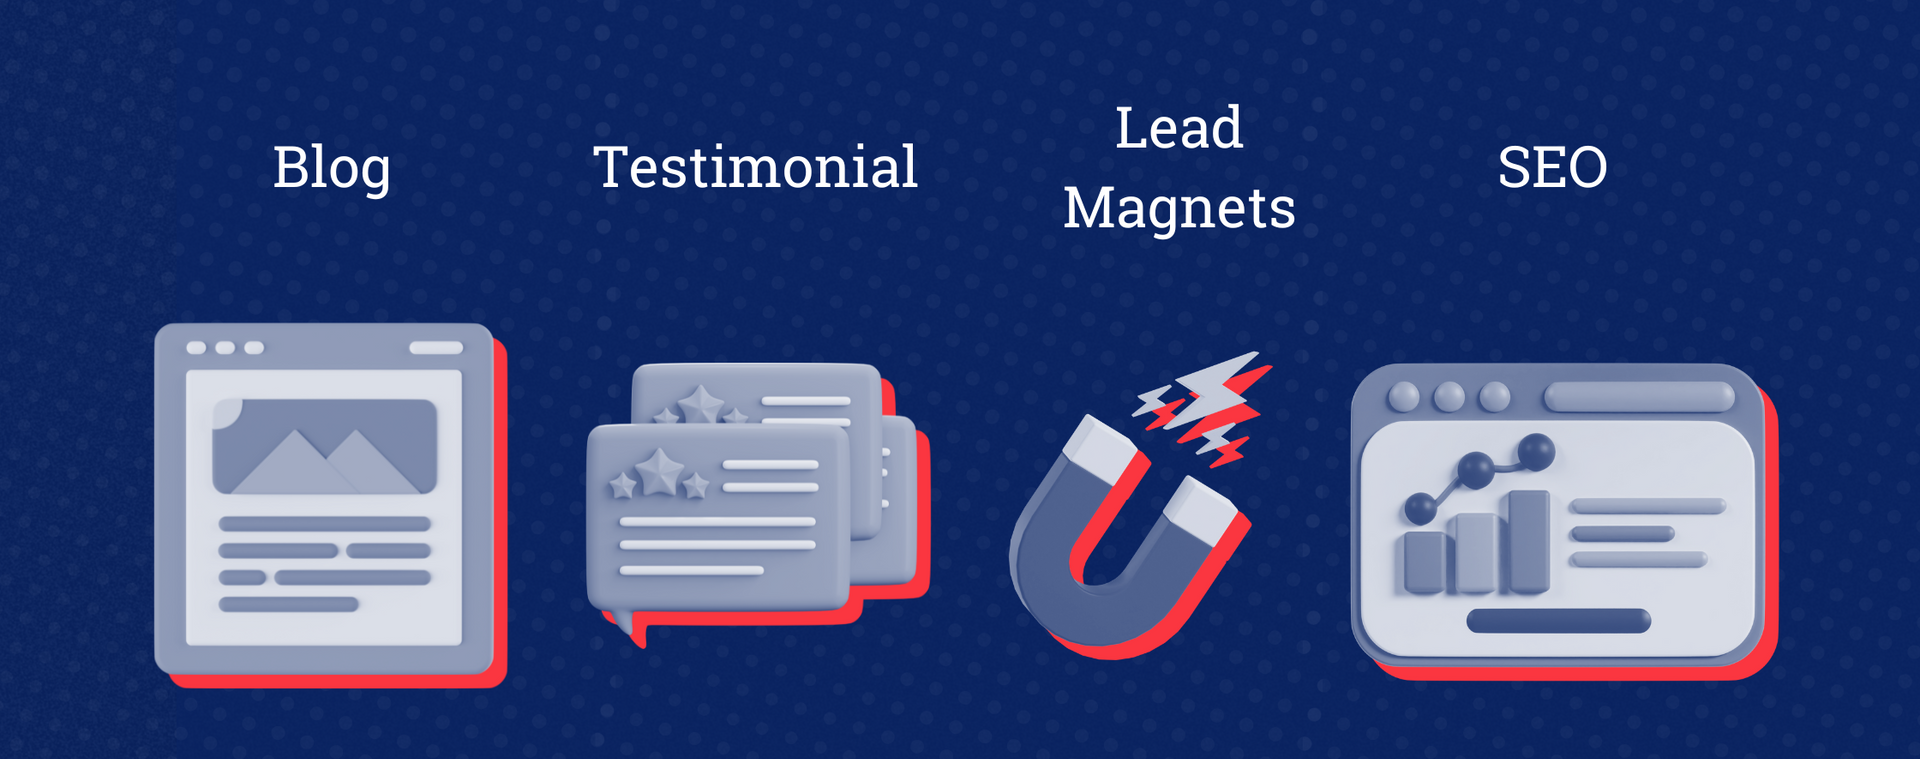 a blue background with icons for blog testimonial lead magnets and seo